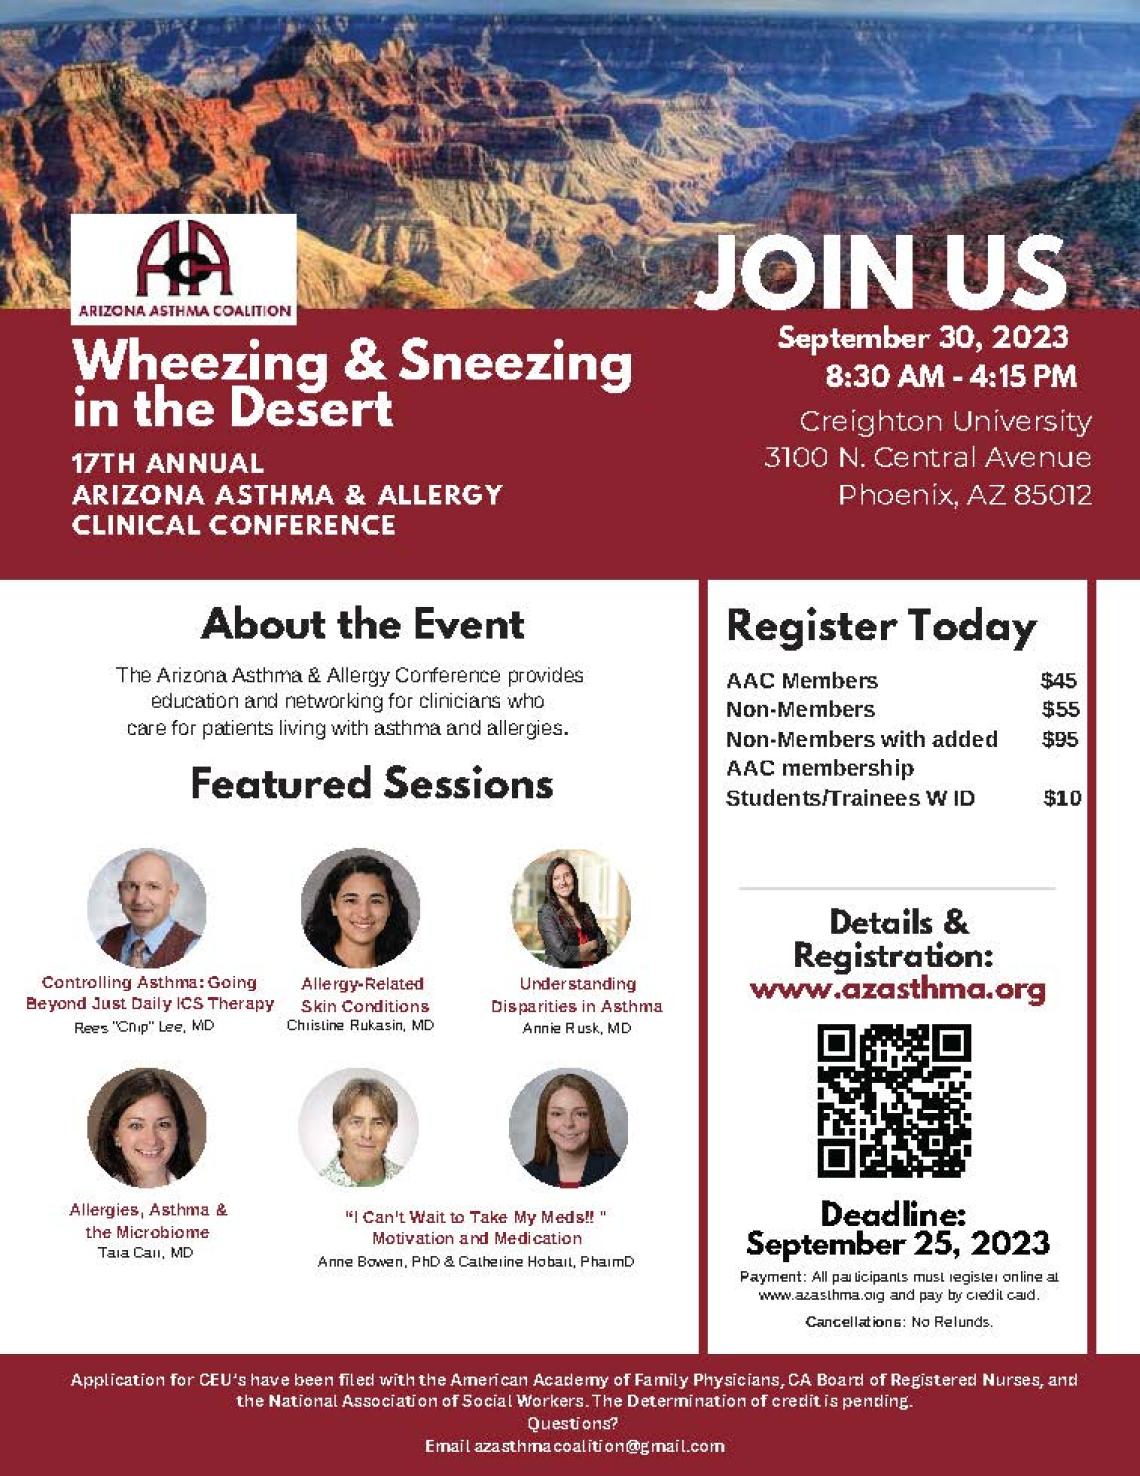 17th Annual Arizona Asthma & Allergy Cliincal Conference with Speakers and Topics